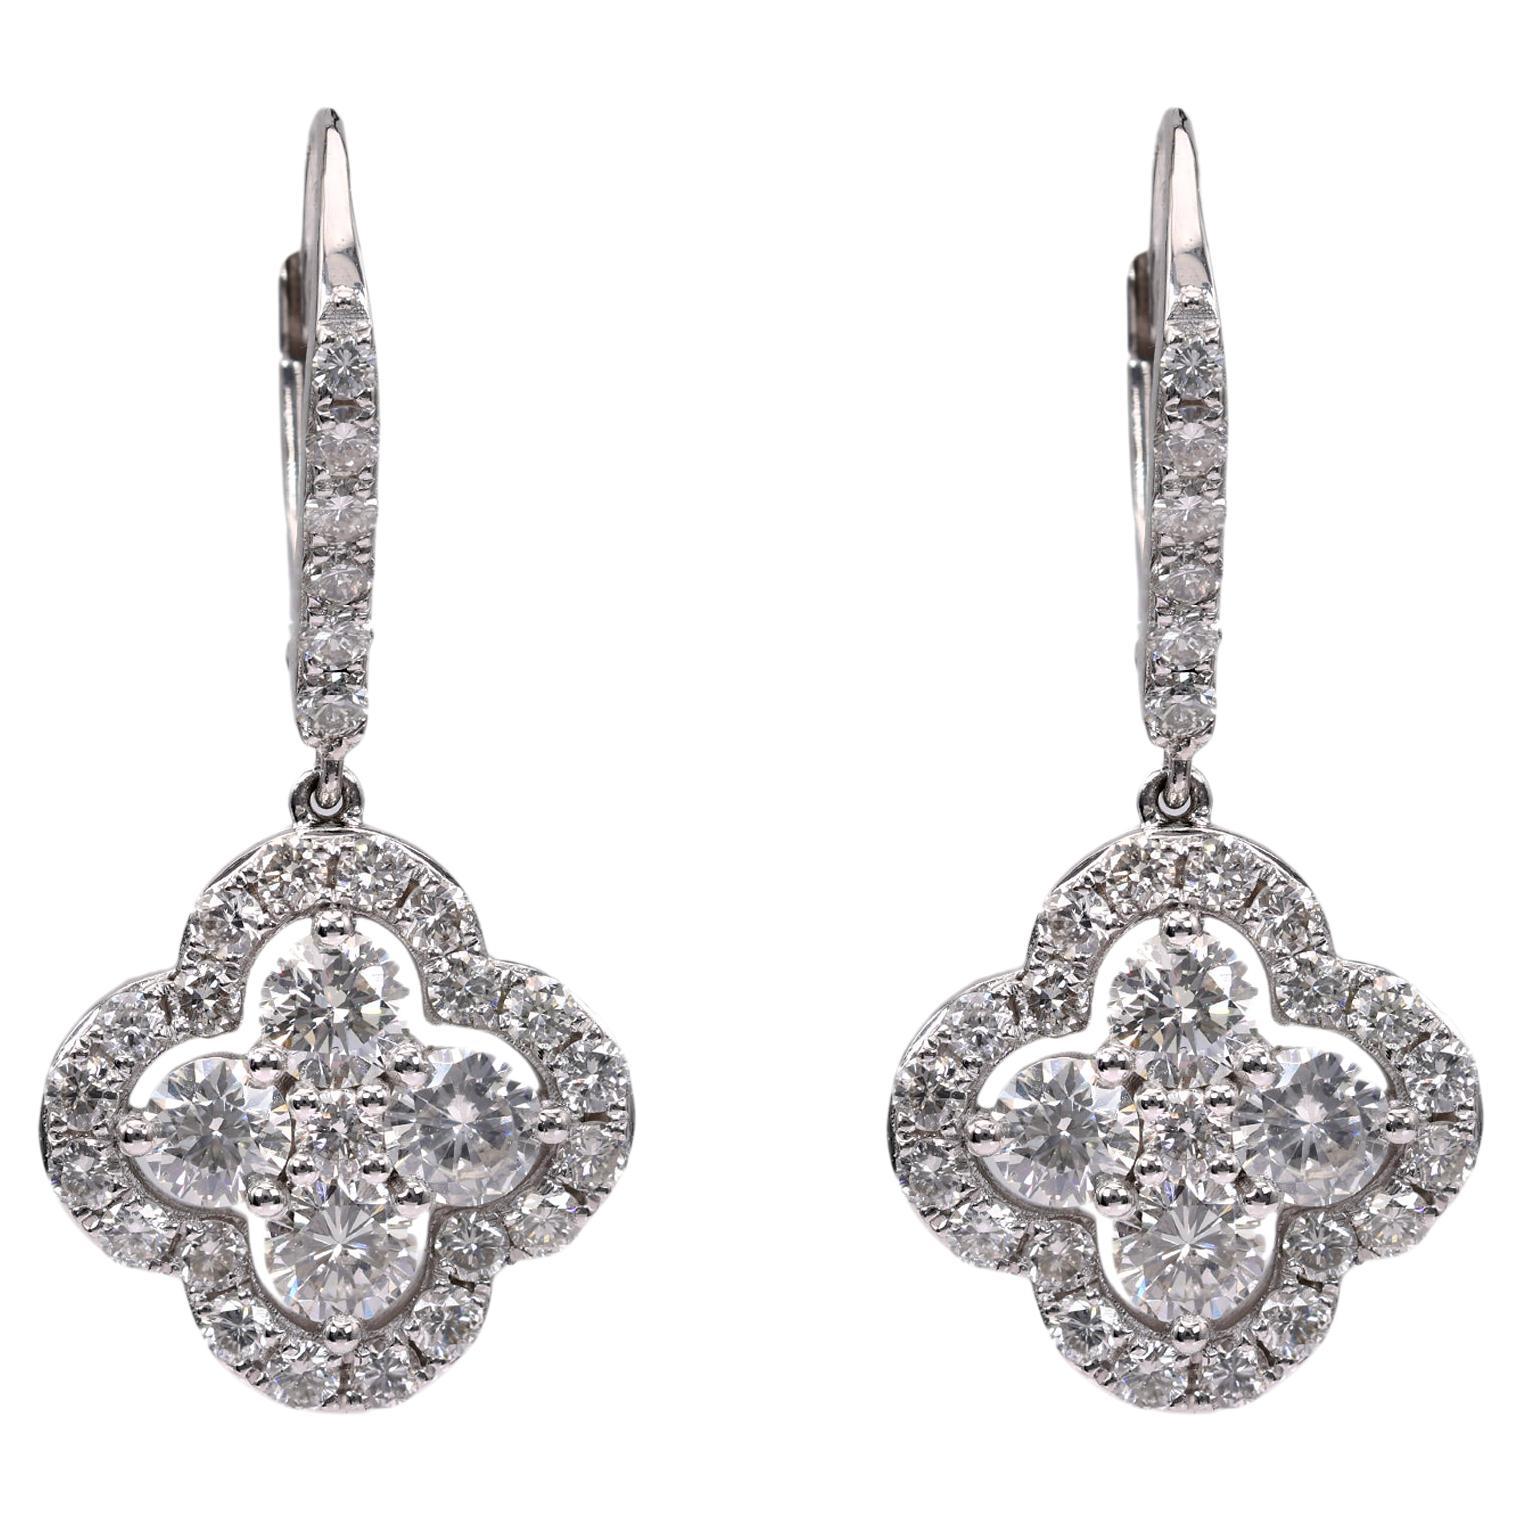 2.55 Carat Total Weight Diamond Platinum Earrings For Sale